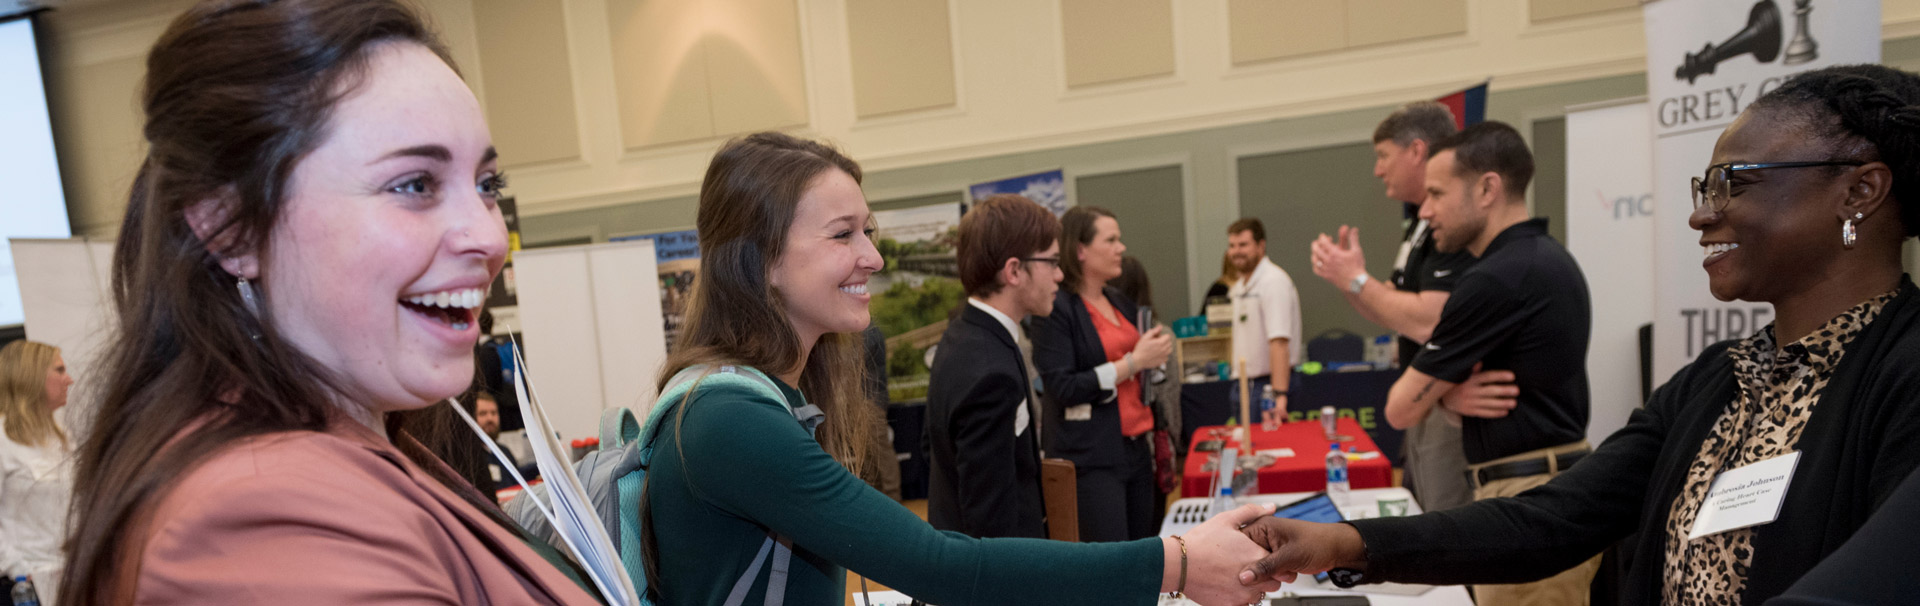  A young woman shakes hands with a prospective employer at the Job and Internship Fair